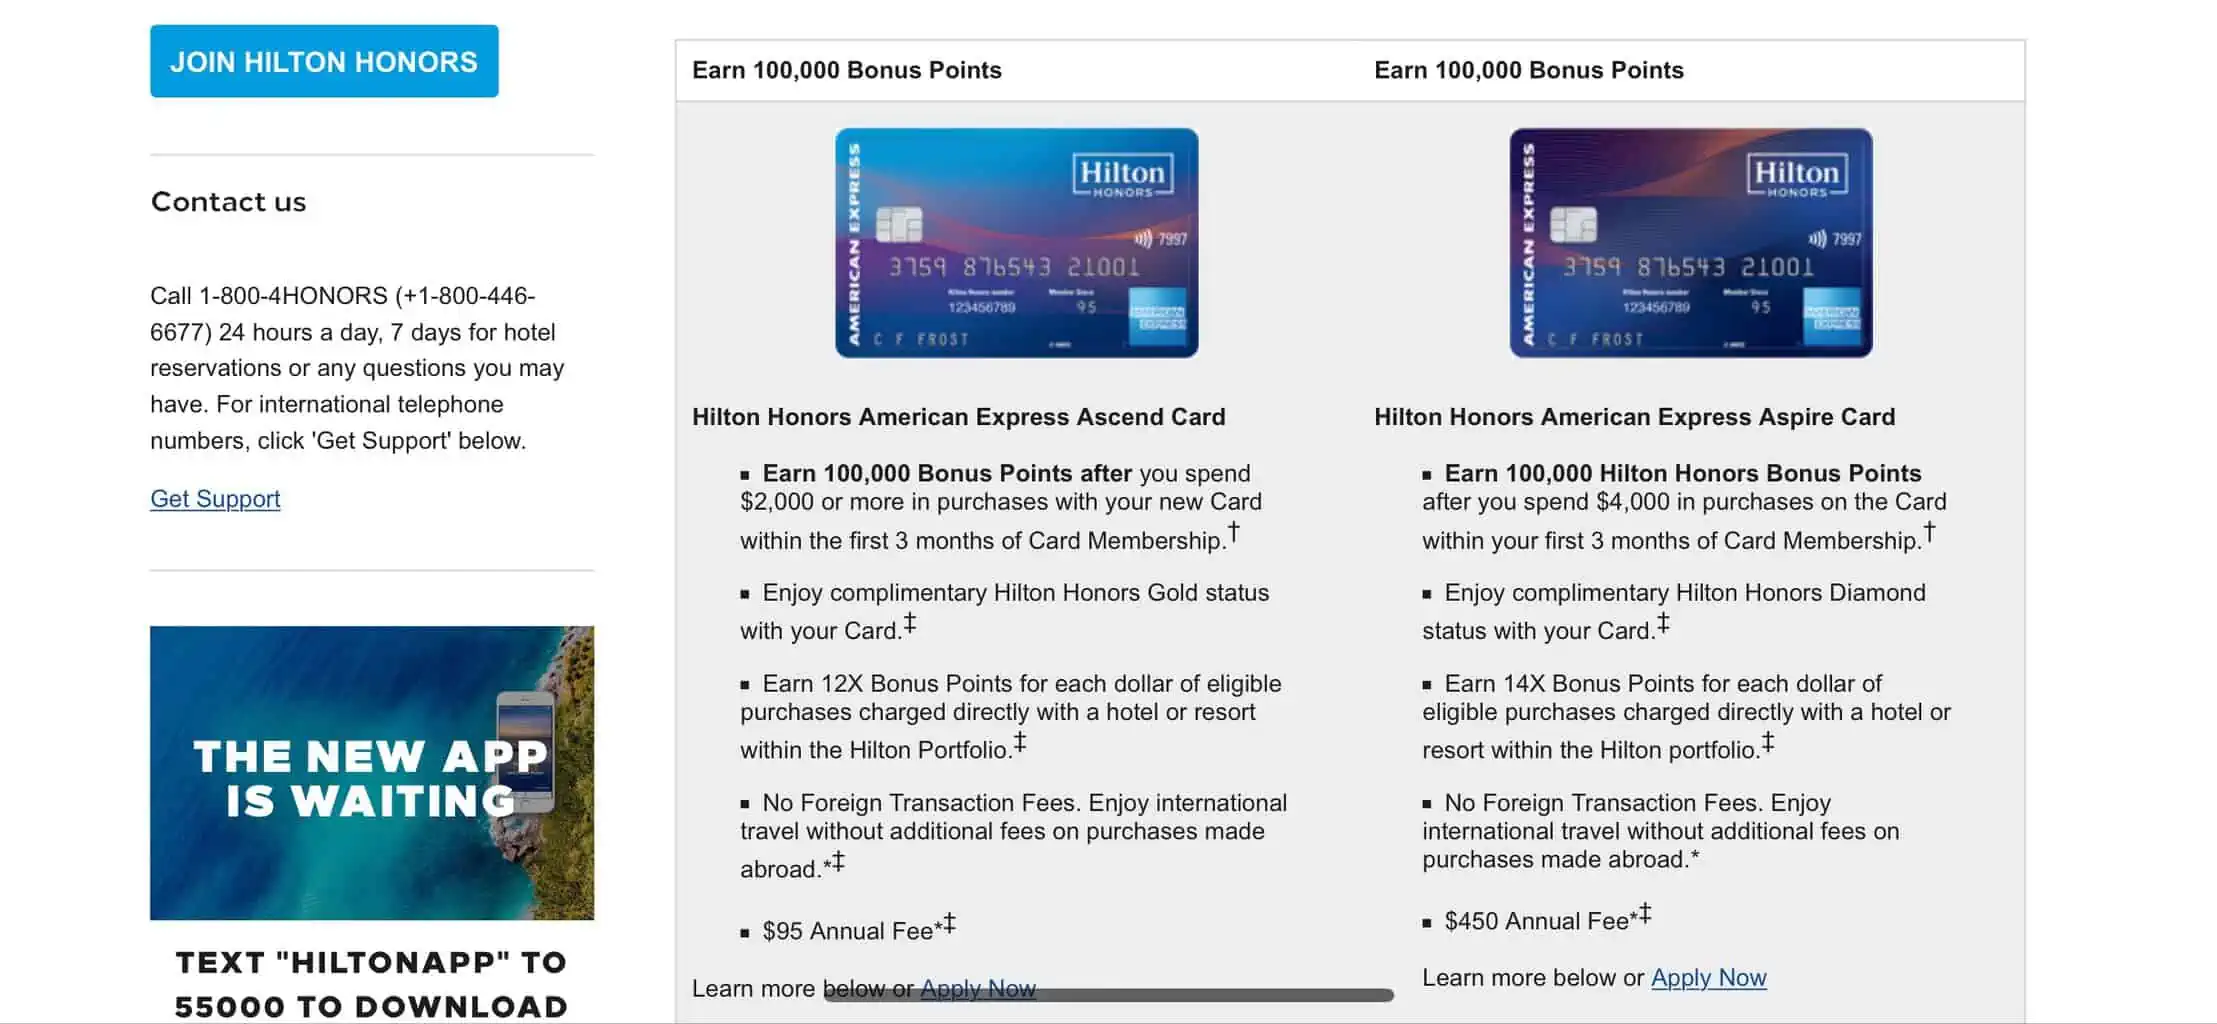 Save Money on Hotels - Hilton HHonors Credit Card